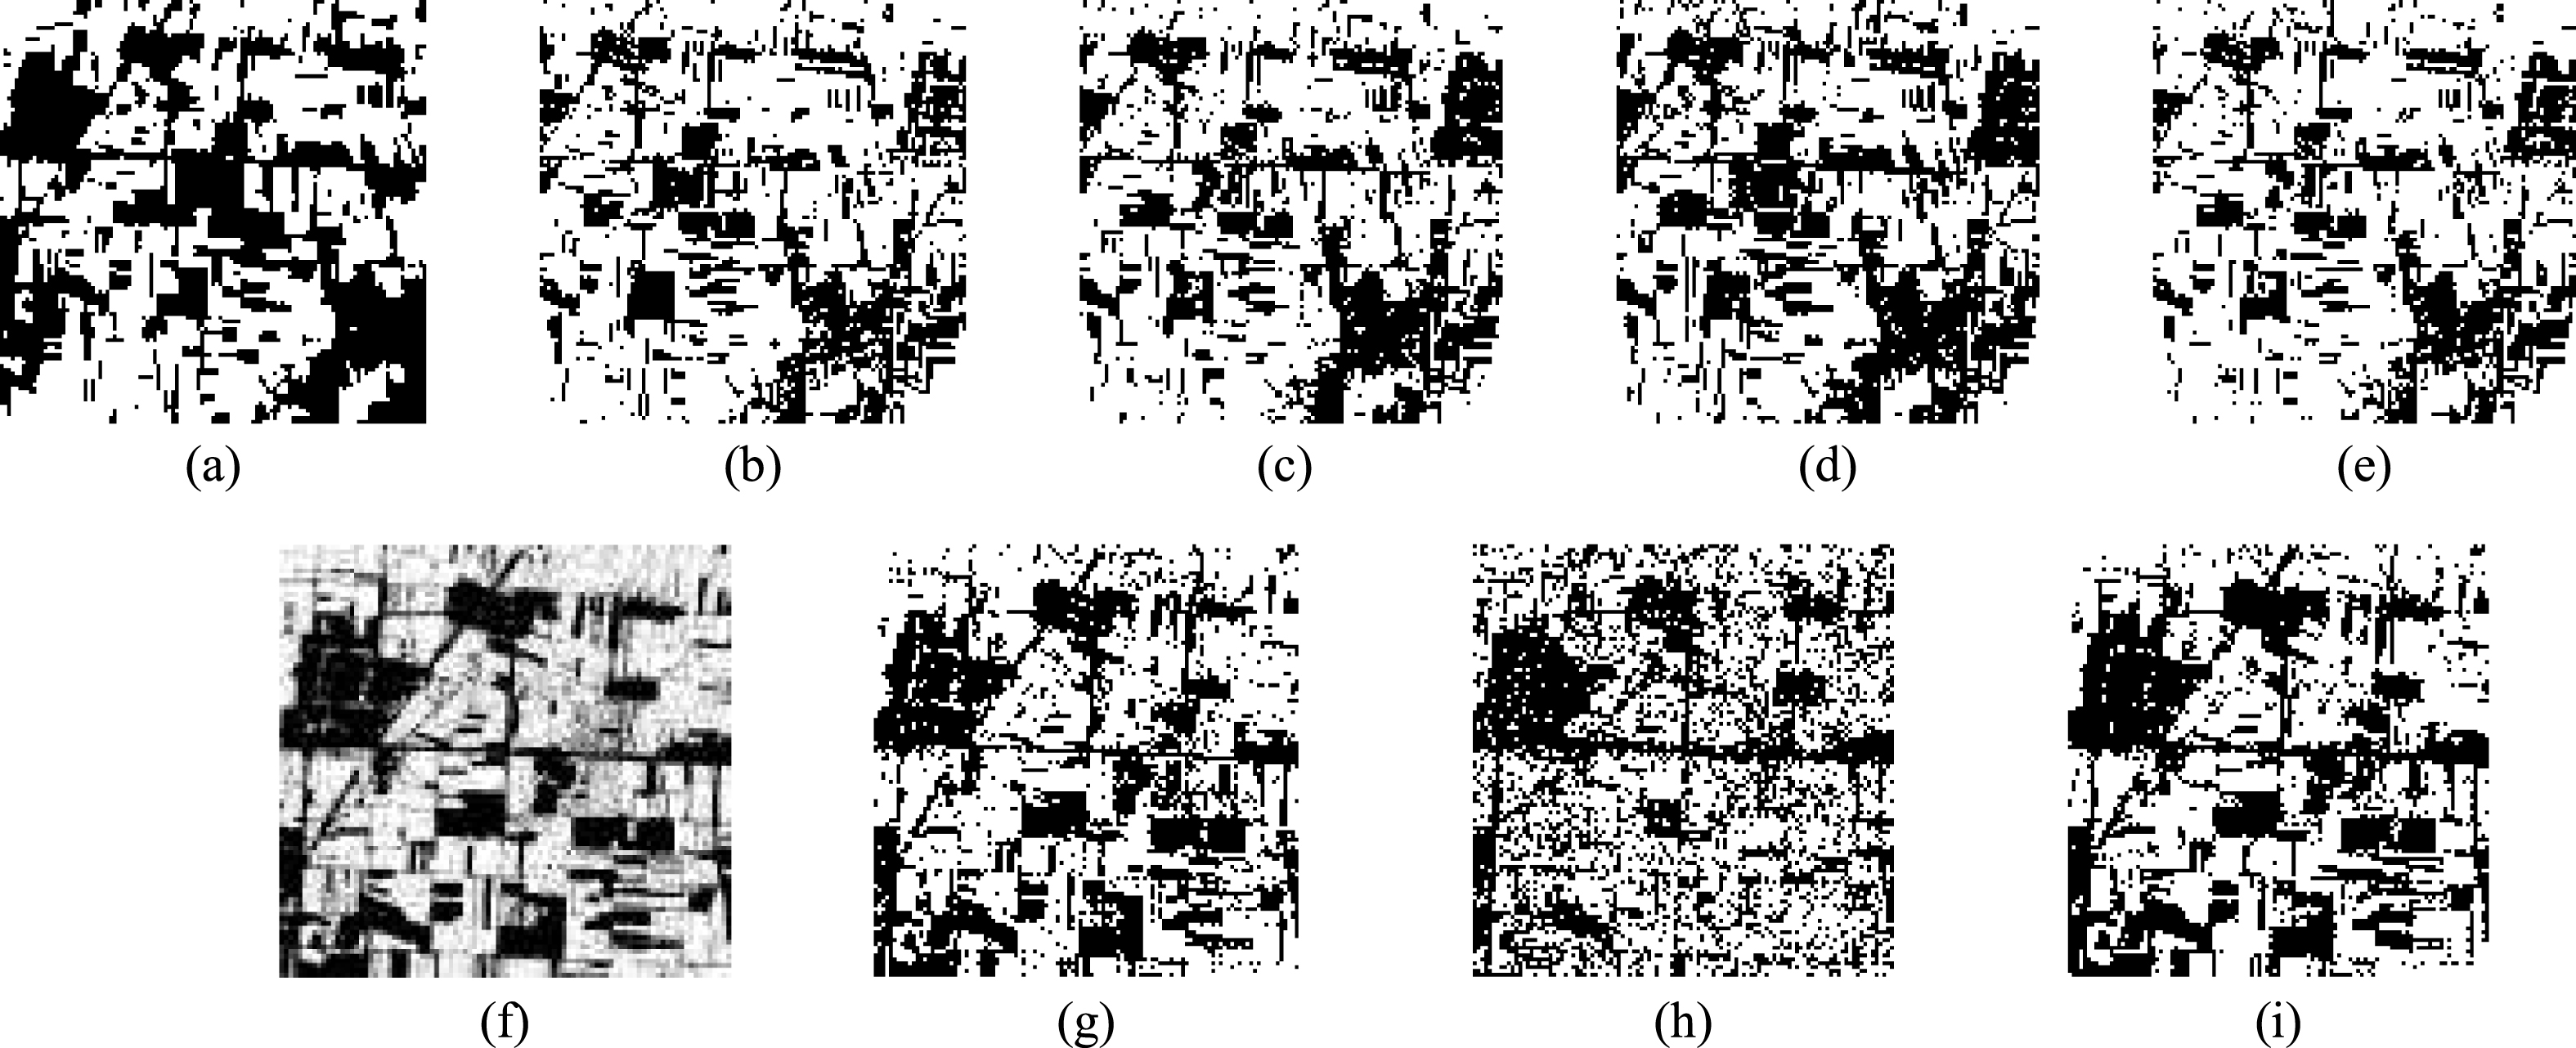 Classification results of the second dataset with different methods (a) Ground truth;
 (b) Mahal Dist; (c) Parallel; (d) Max Likeli; (e) Mini Diste; (f) SVM; (g) Adaboost_FAM (spectrum);
 (h) Adaboost_FAM (texture); and (i) Adaboost_FAM(spectrum + texture).